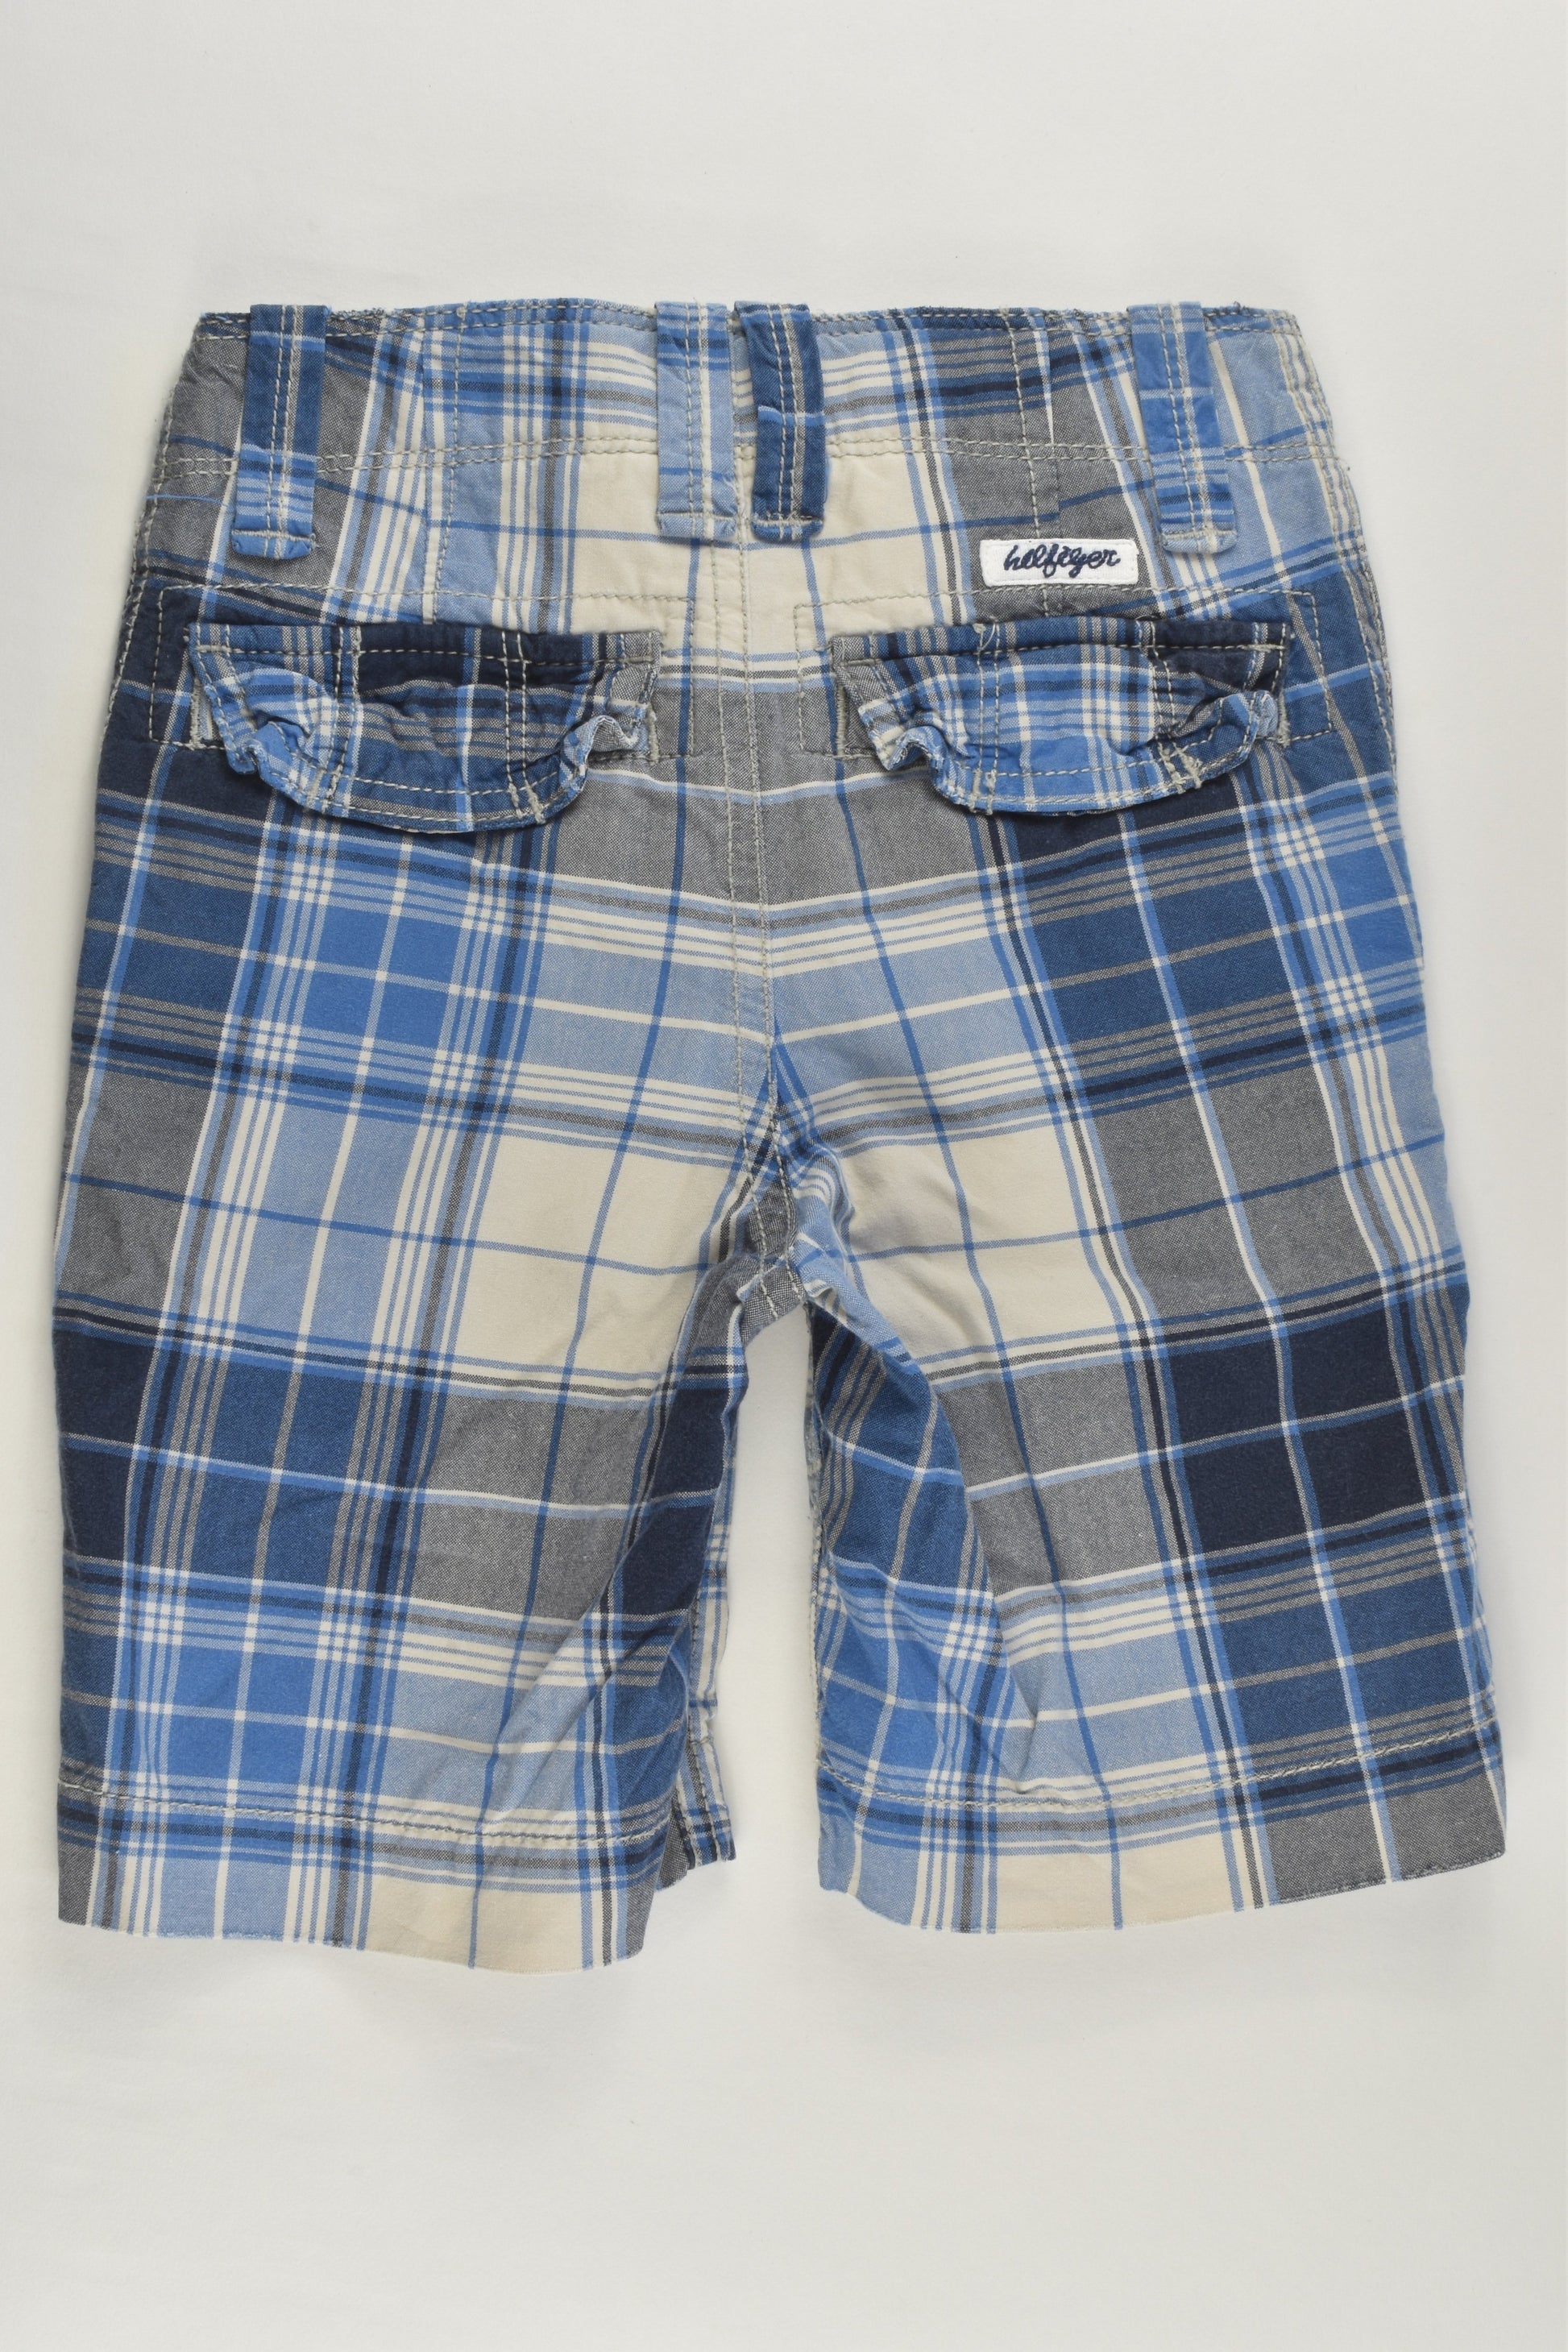 Tommy Hilfiger Size 4 Checked Shorts